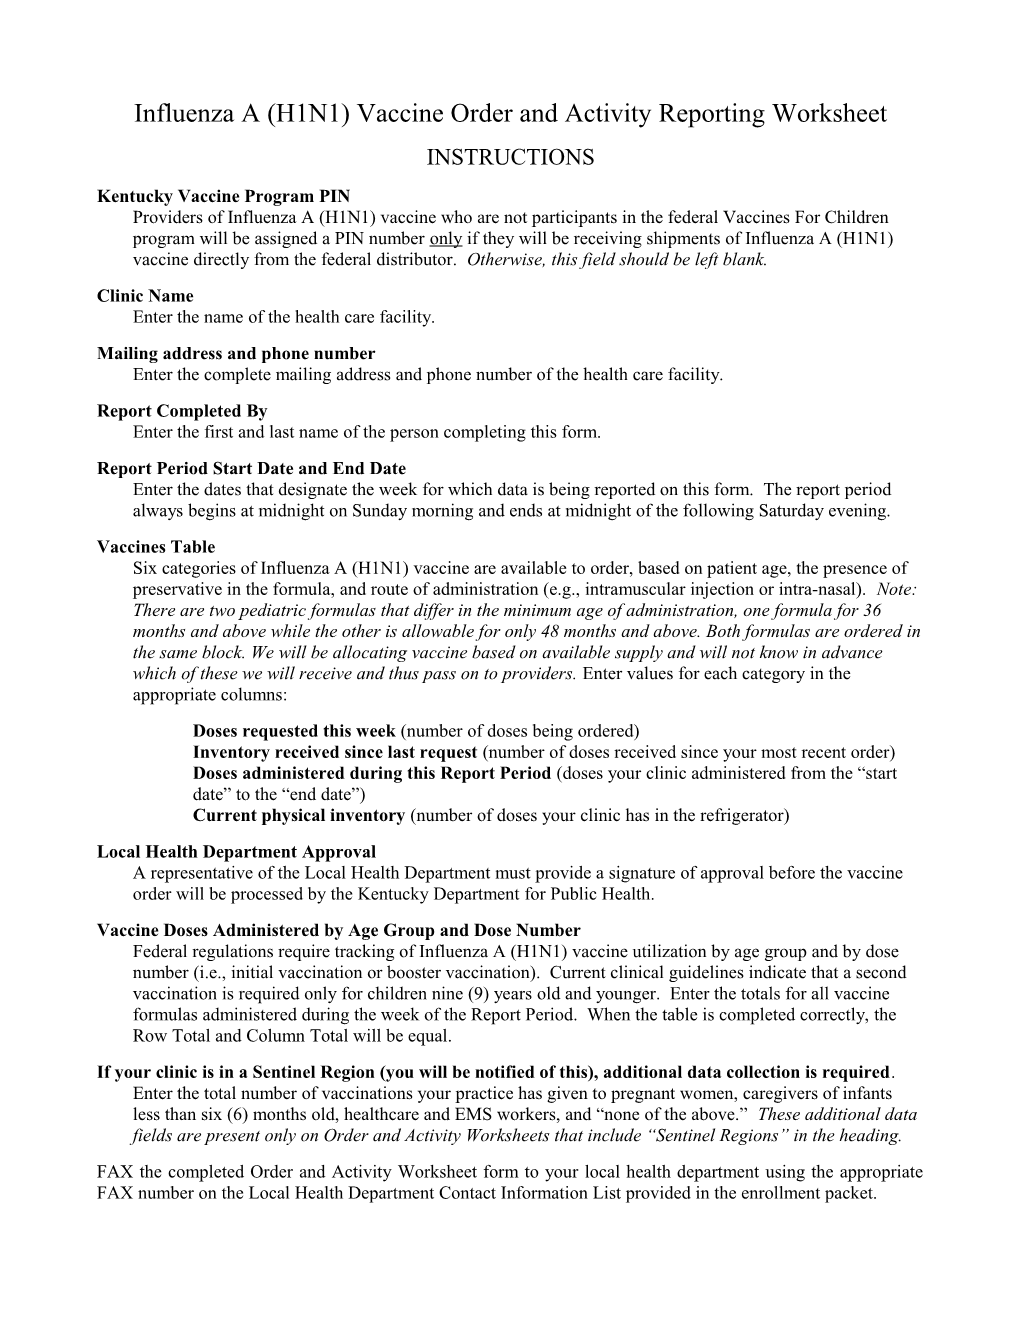 Novel H1N1 Influenza Vaccine Order and Activity Reportingworksheet